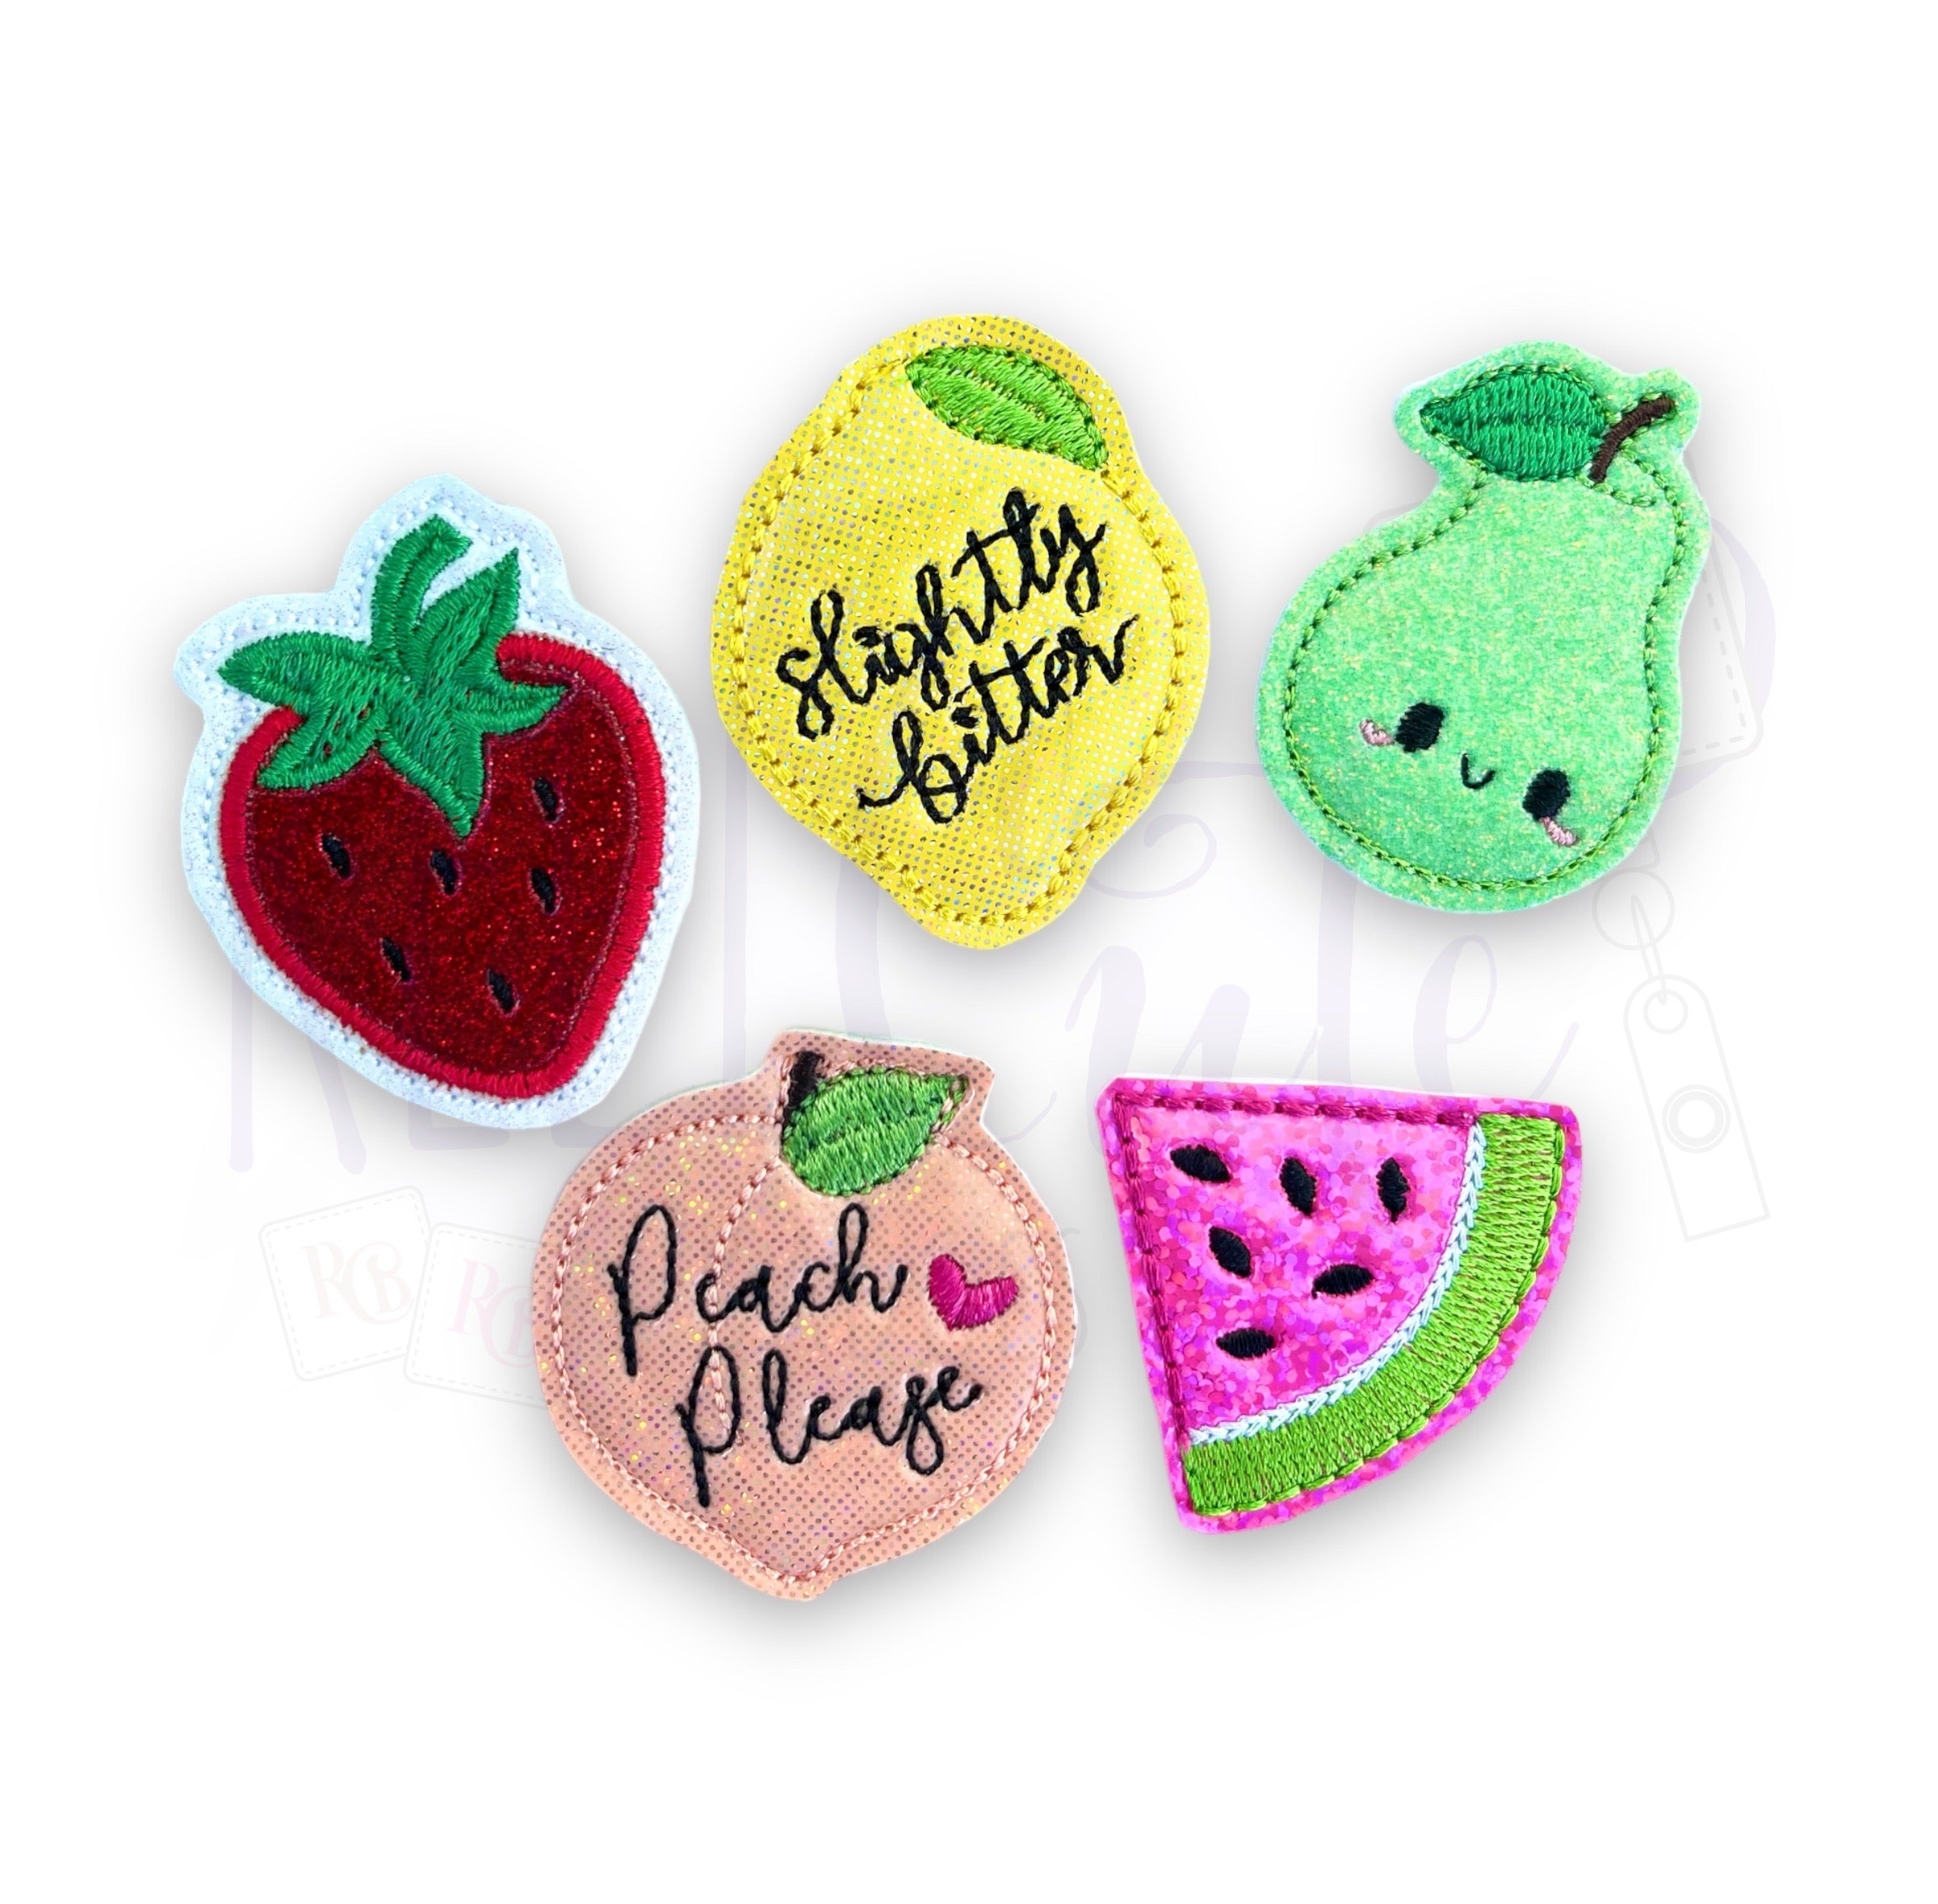 You're One In a Melon – Reel Cute Badges